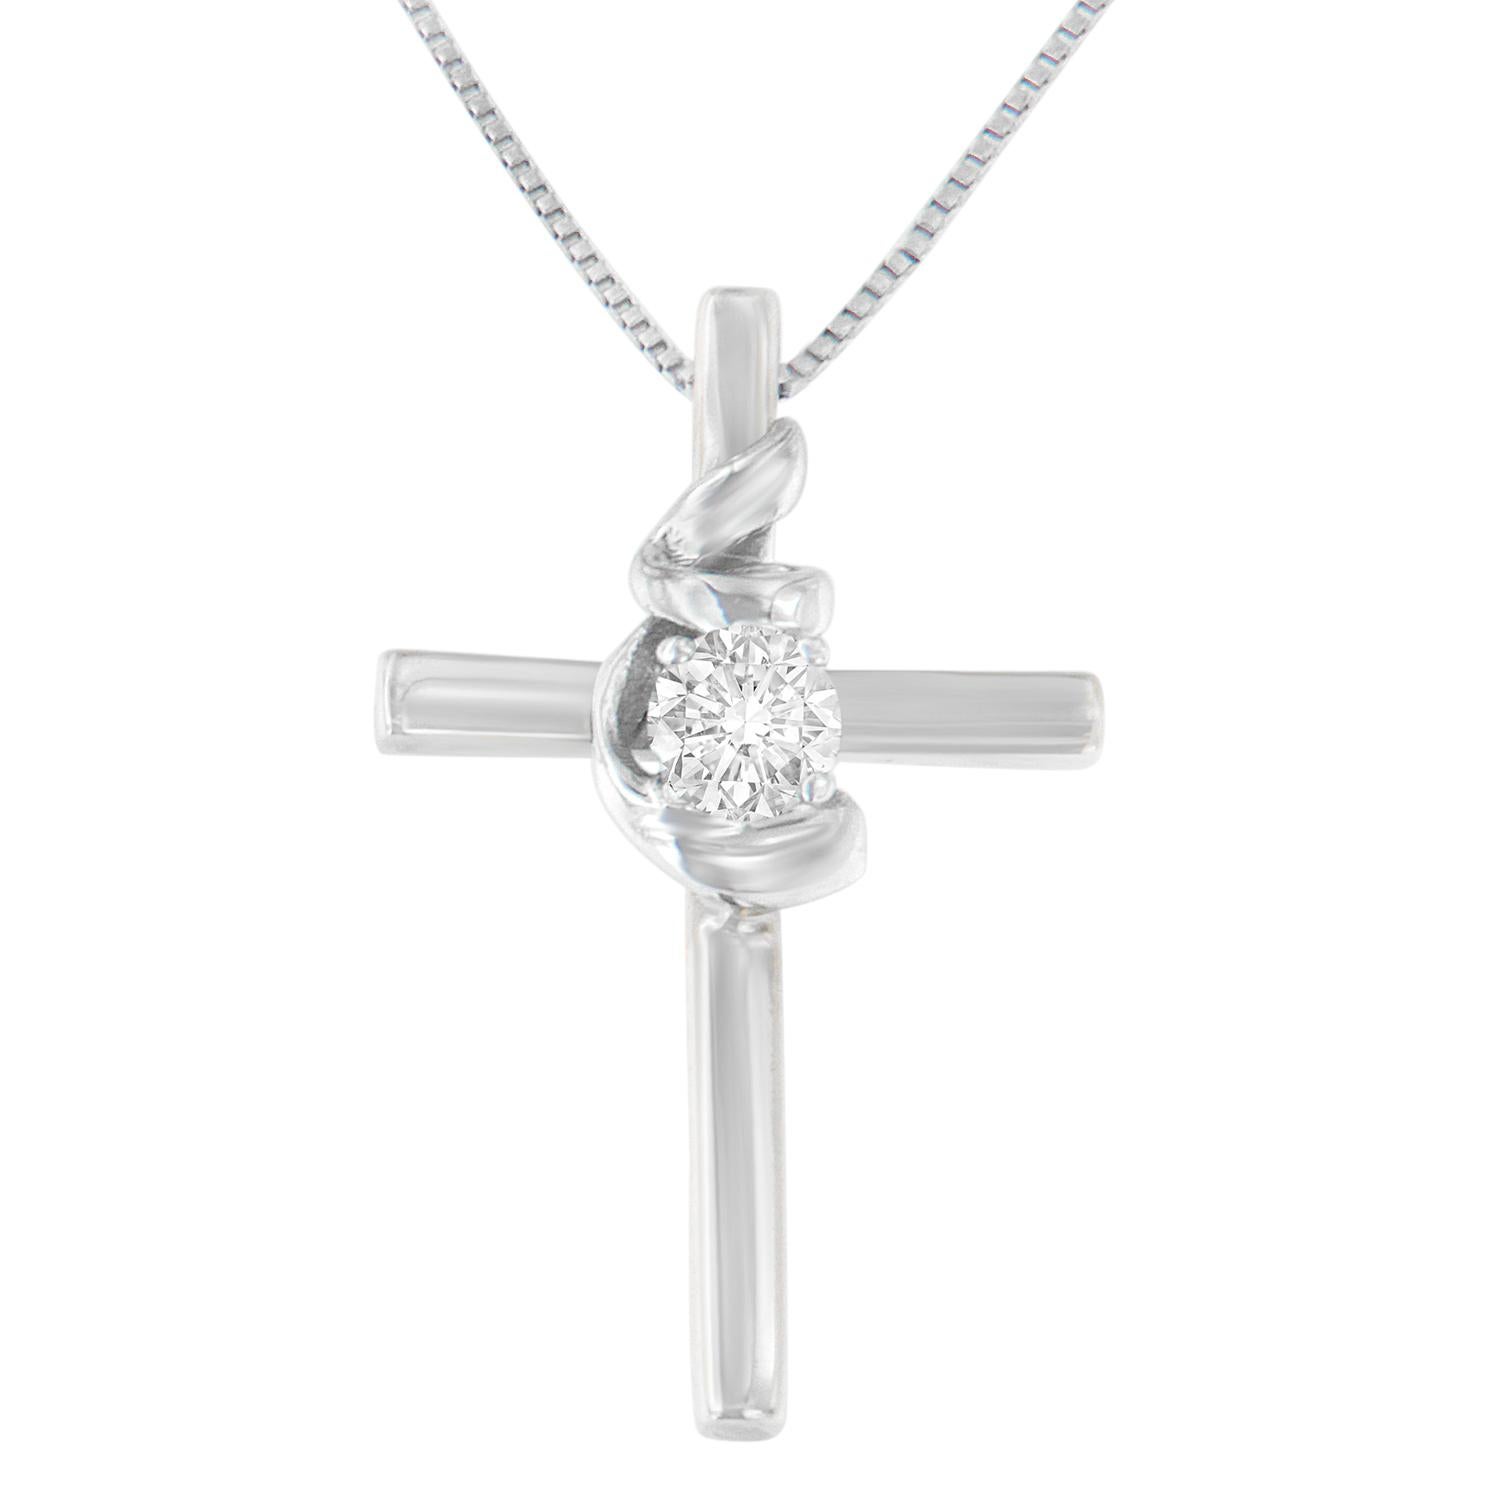 Celebrate your divinity with this elegant .925 sterling silver cross pendant embellished with a natural, round-cut diamond, framed by a ribbon motif. This authentic design is crafted of real 92.5% sterling silver that has been electro-coated with